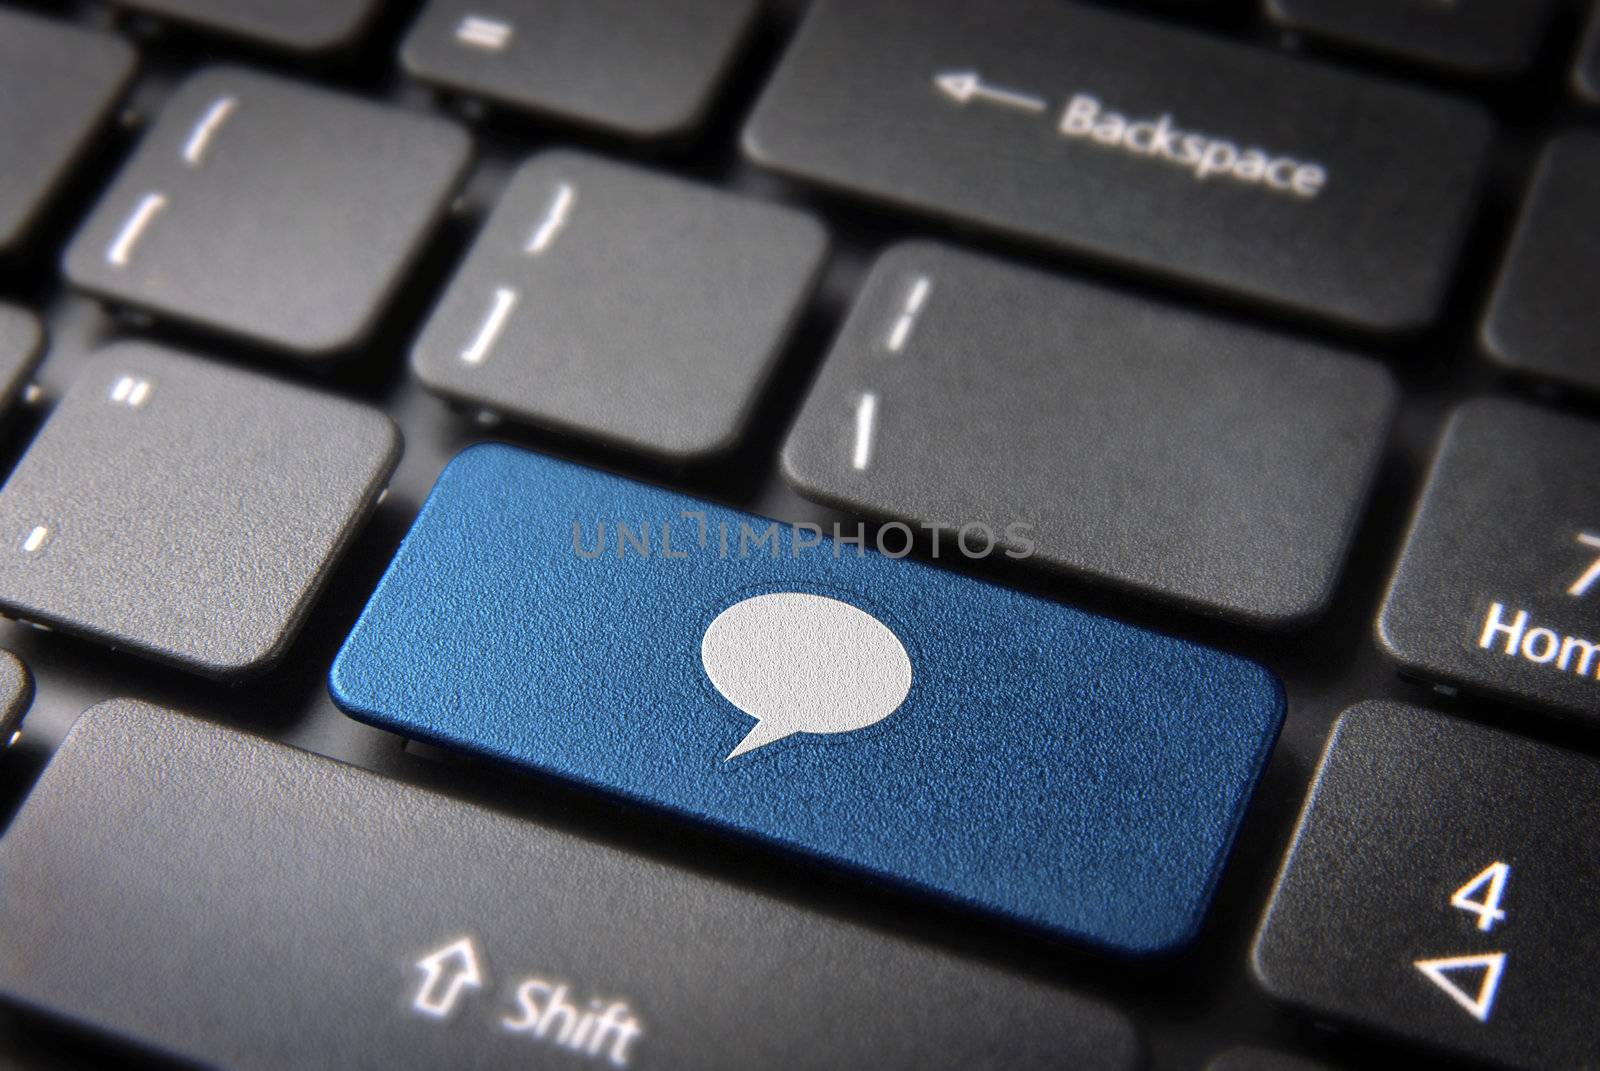 Social media key with speech bubble icon on laptop keyboard. Included clipping path, so you can easily edit it.